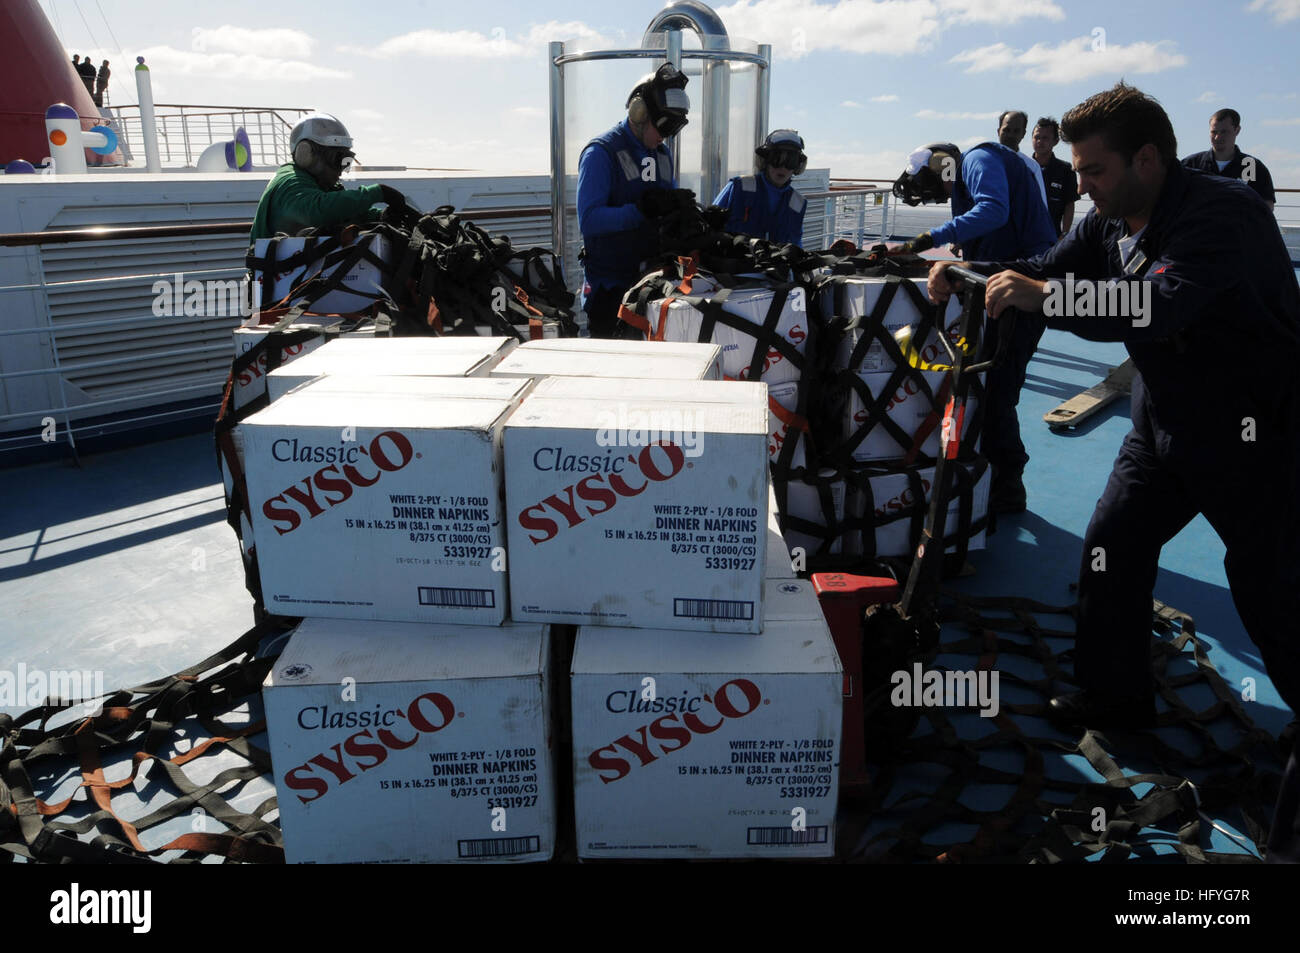 Sailors assigned to the aircraft carrier USS Ronald Reagan (CVN 76) and crew members of Carnival cruise ship C/V Splendor unload pallets of food on the weather-deck of the cruise ship during an emergency vertical replenishment. Ronald Reagan was diverted from its current training maneuvers at the direction of Commander U.S. Third Fleet, and at the request of the U.S. Coast Guard, to a position south near the Carnival cruise ship C/V Splendor to facilitate the delivery of 4,500 pounds of supplies to the cruise ship. Early Monday, CV Splendor reported it was dead in the water 150 nautical miles  Stock Photo